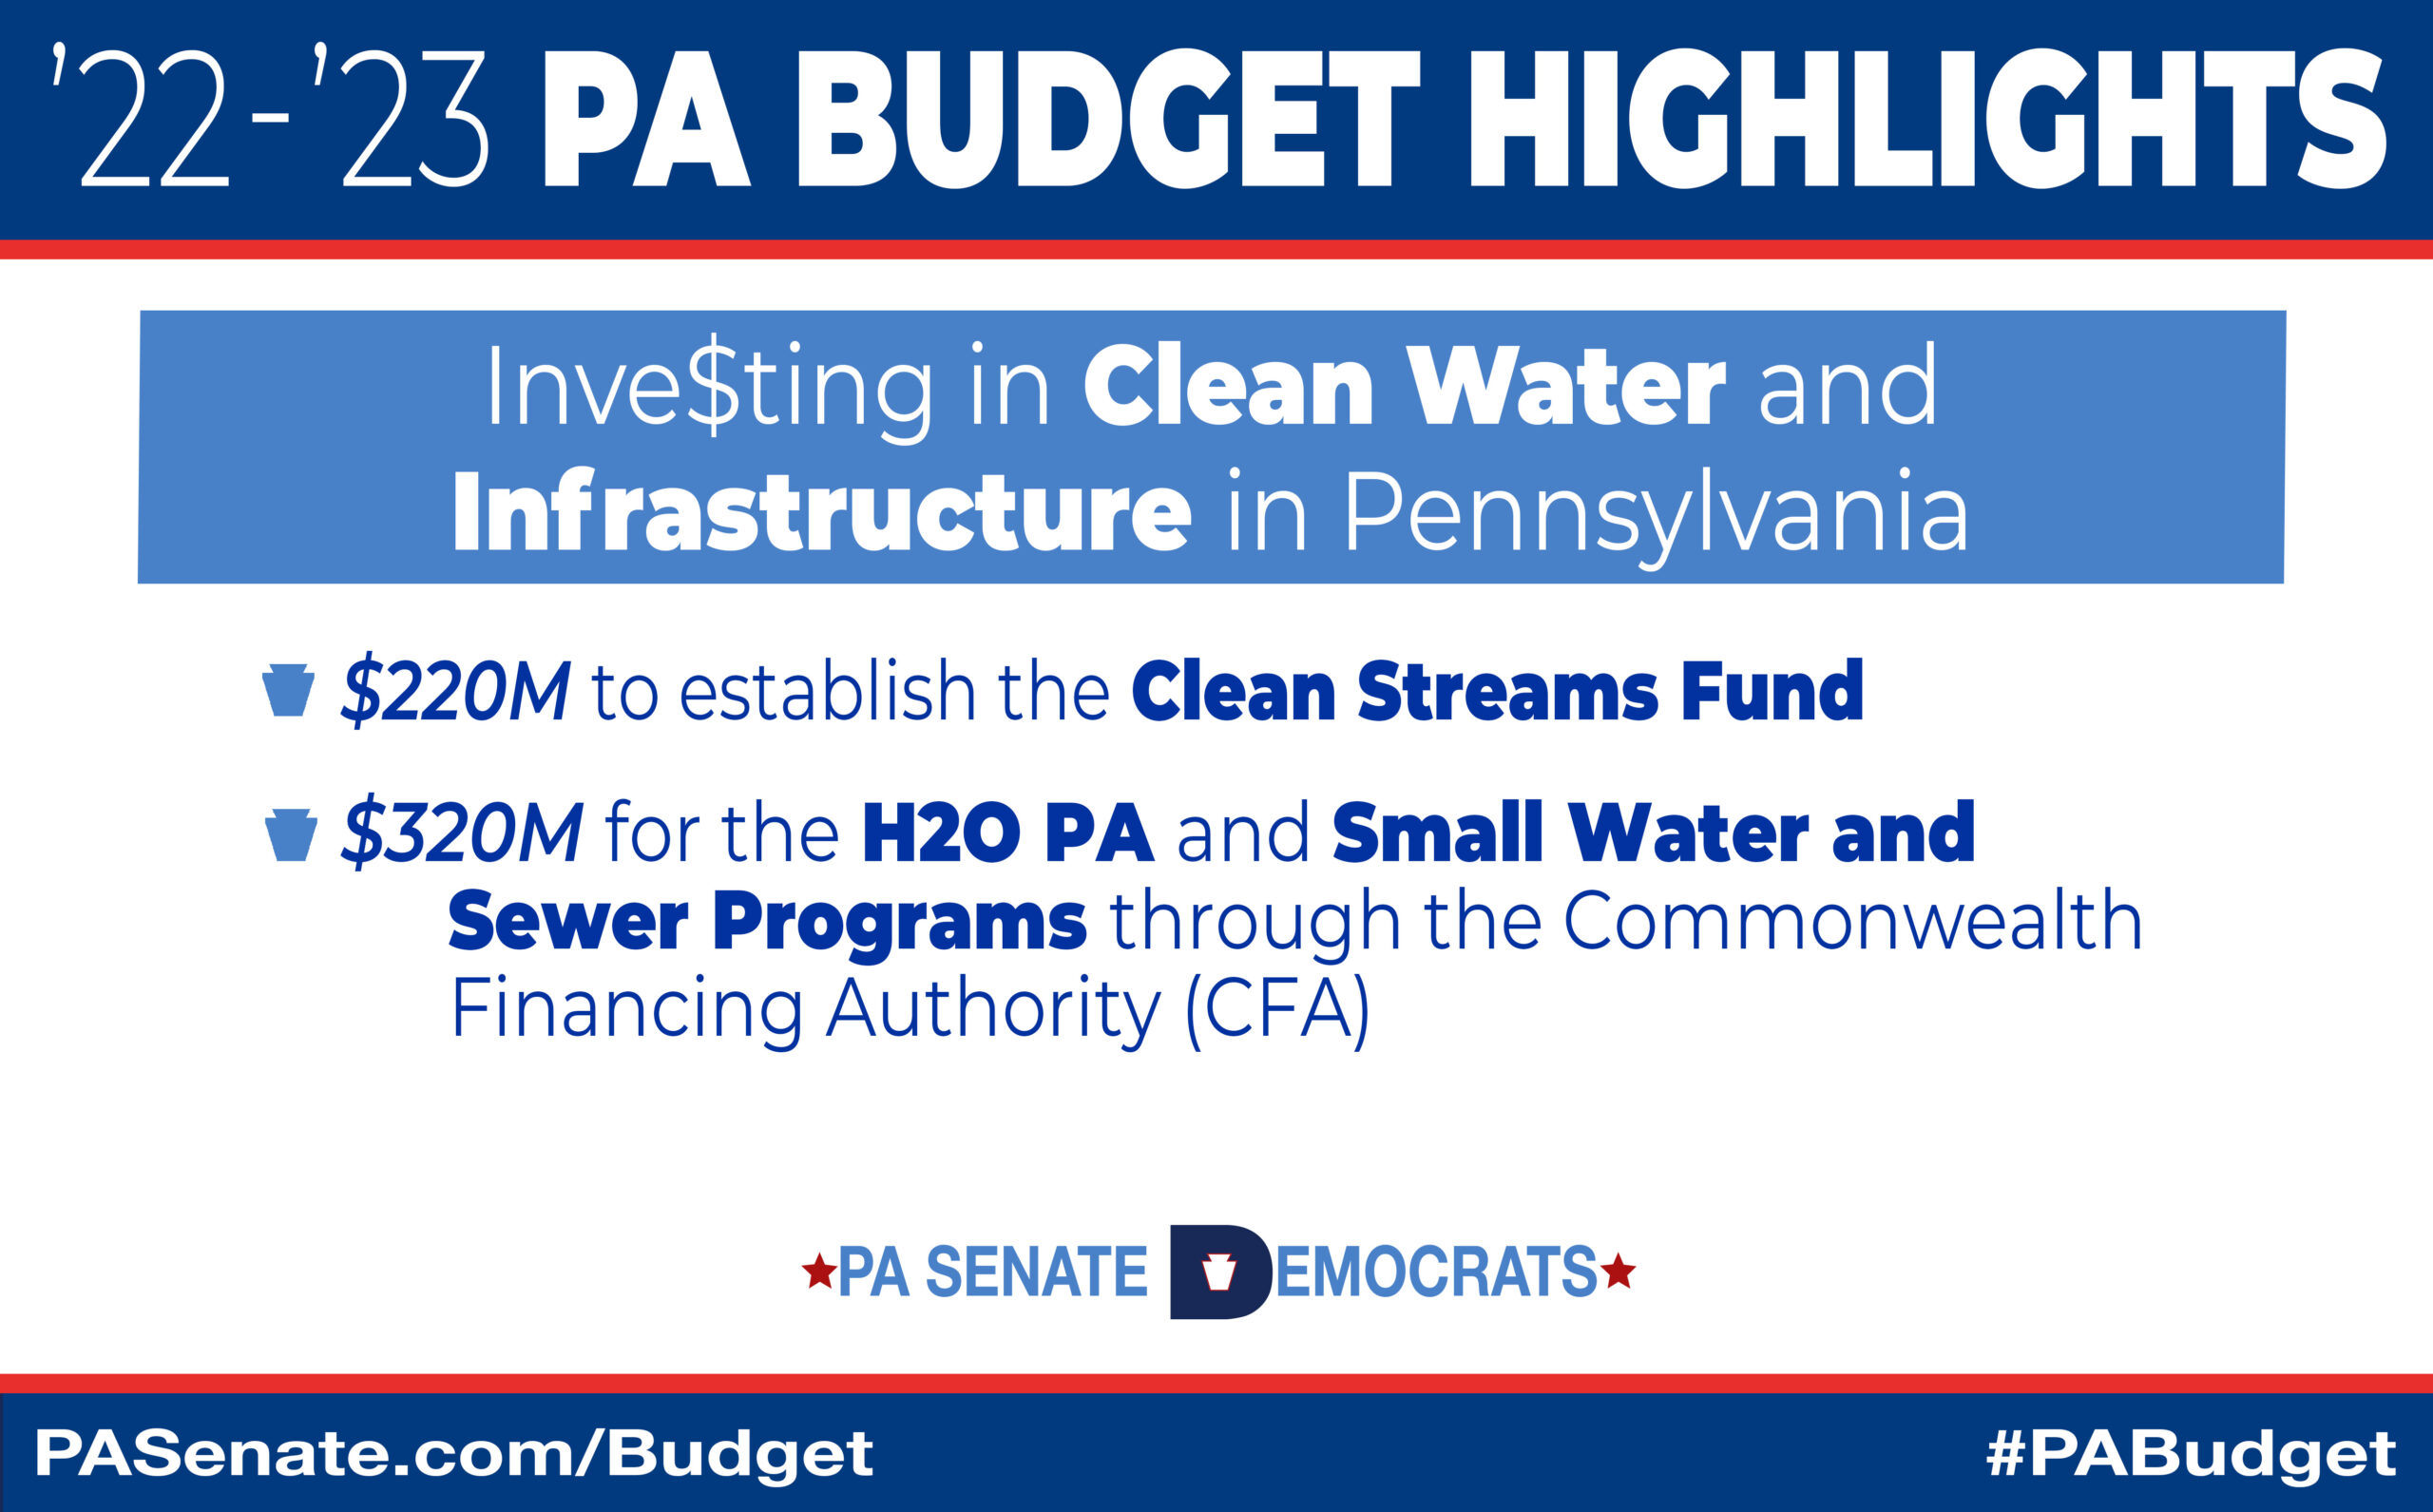 Investing in Clean Water and Infrastructure in PA